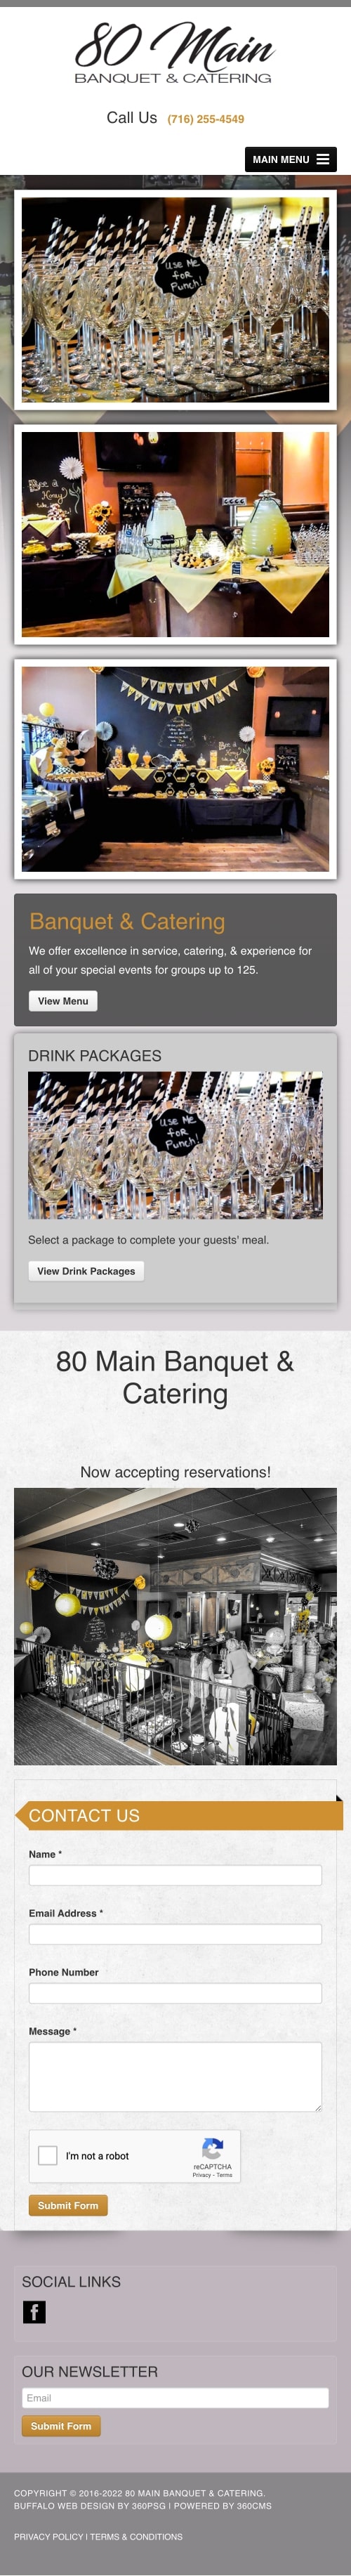 80 Main Banquet & Catering Website - Mobile